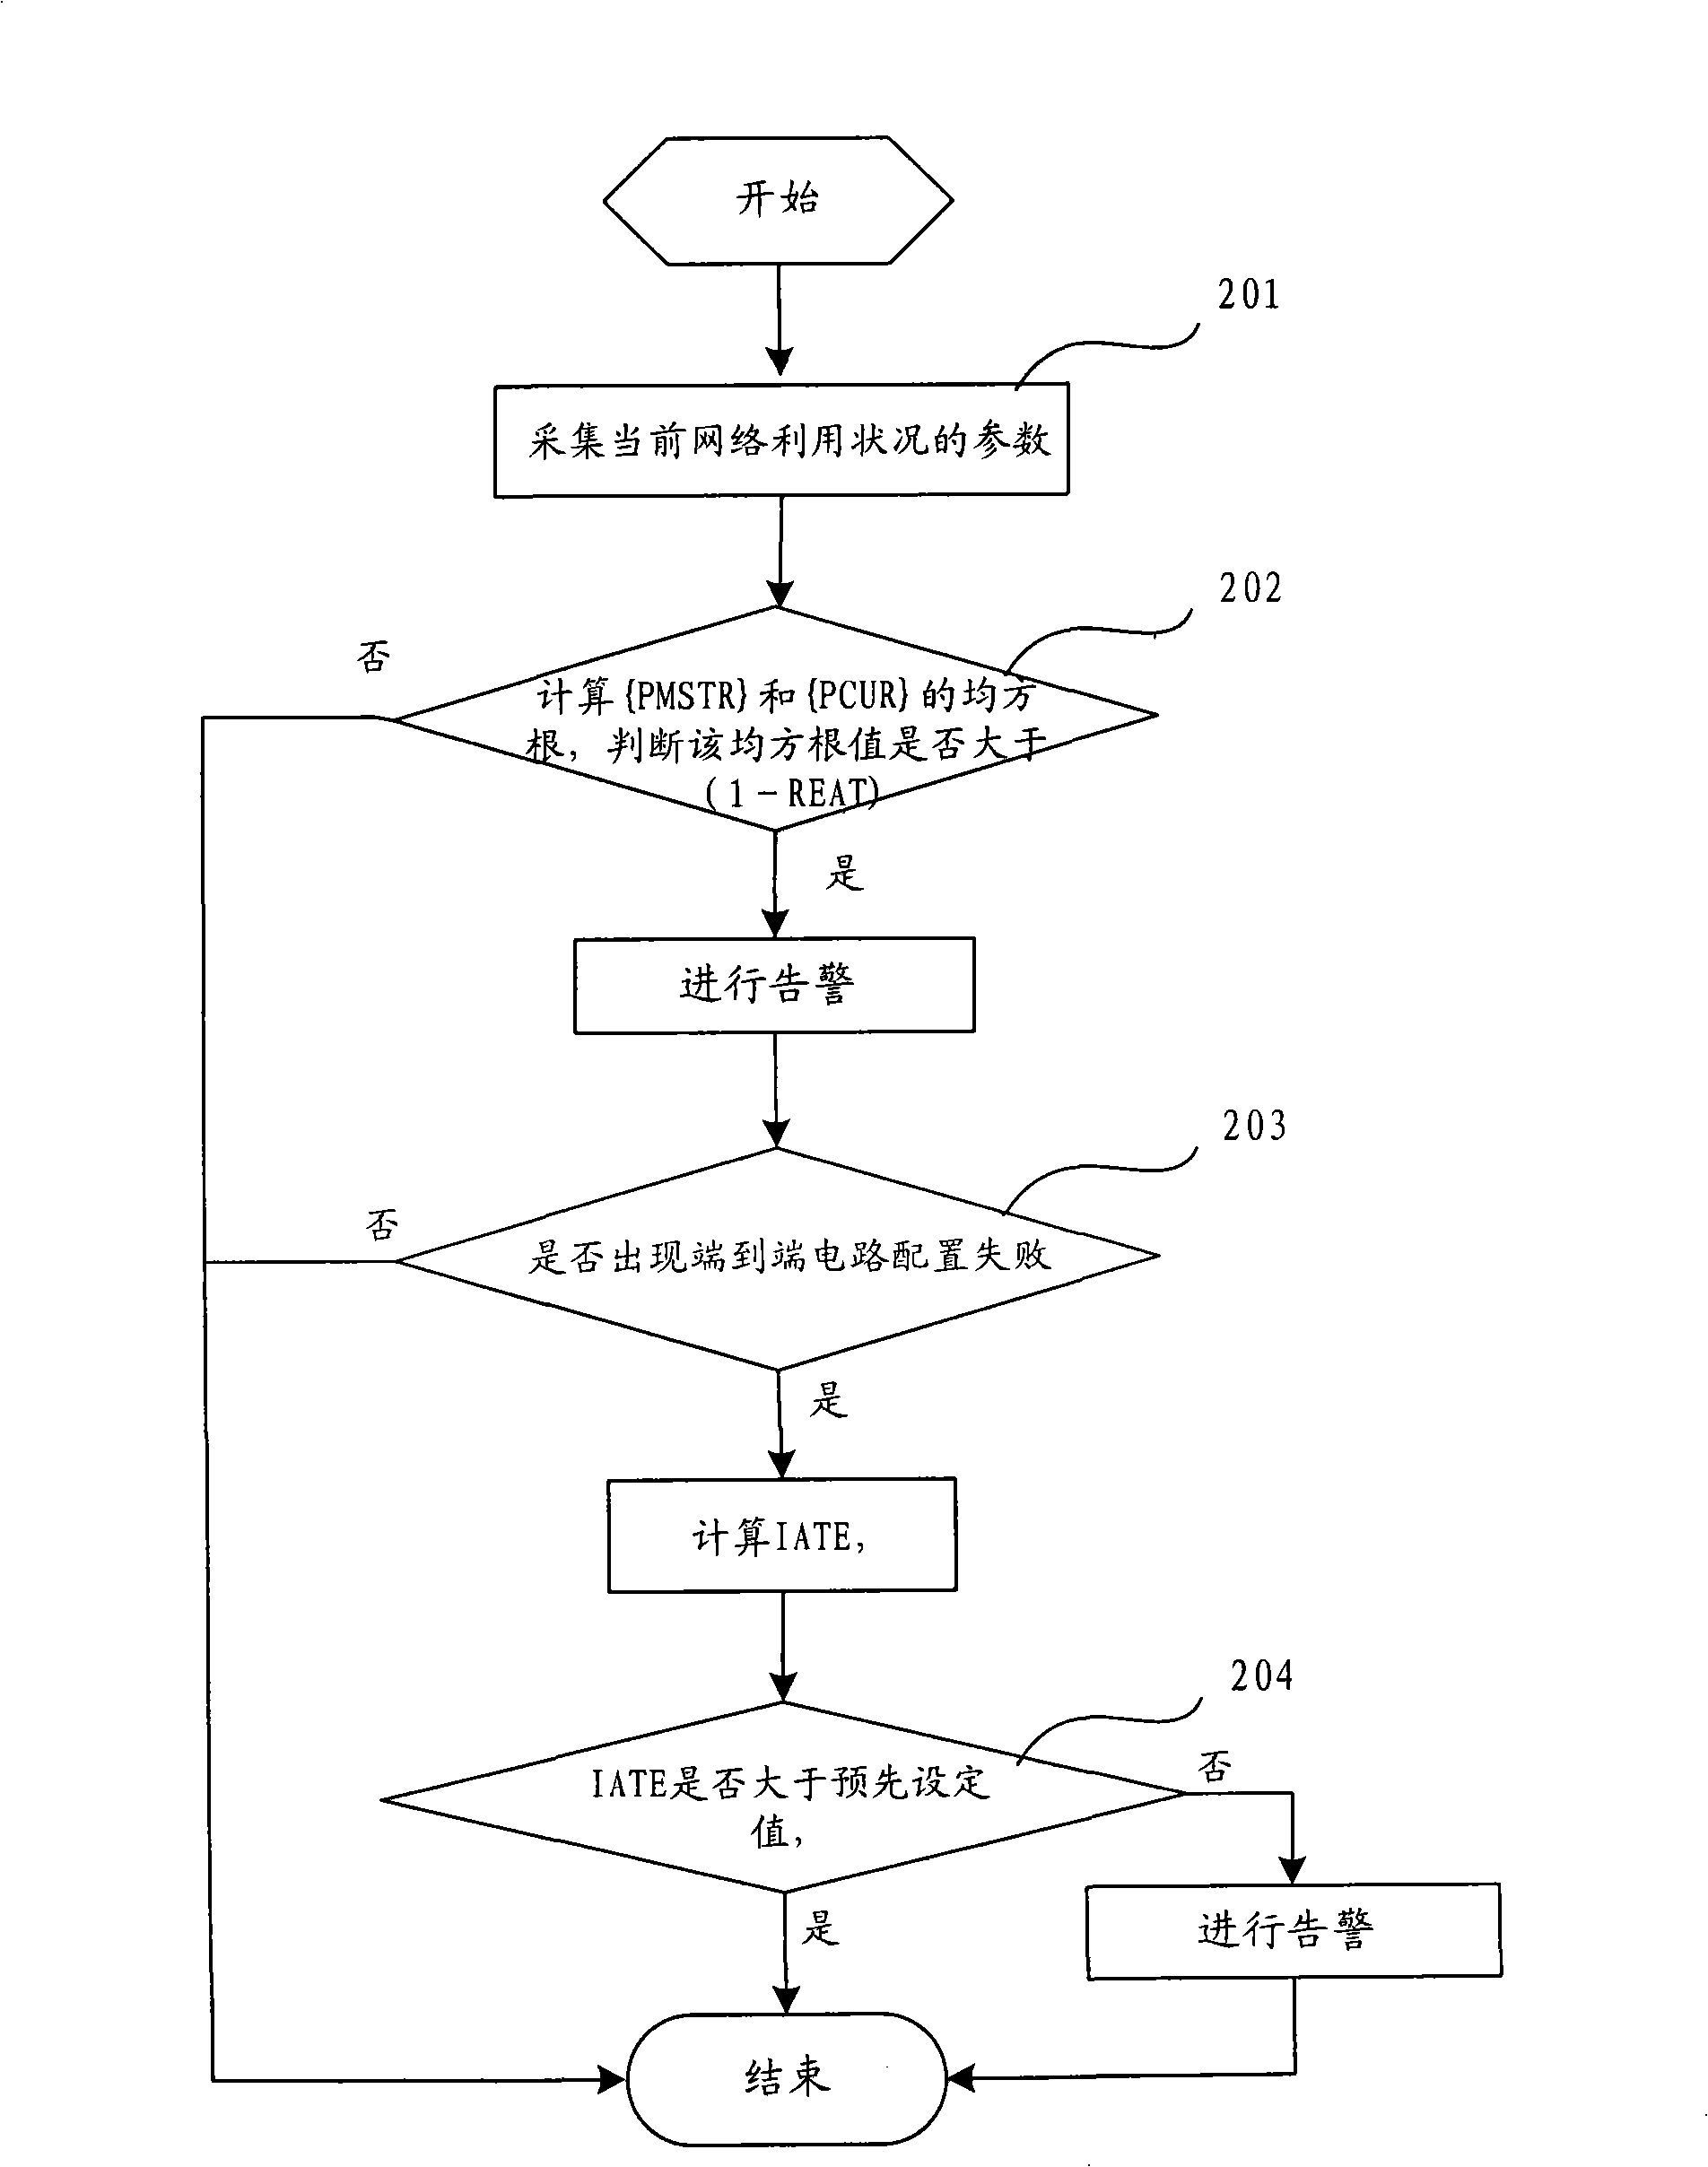 Method and apparatus for analysis processing and testing network resource utilization situation of transmission network